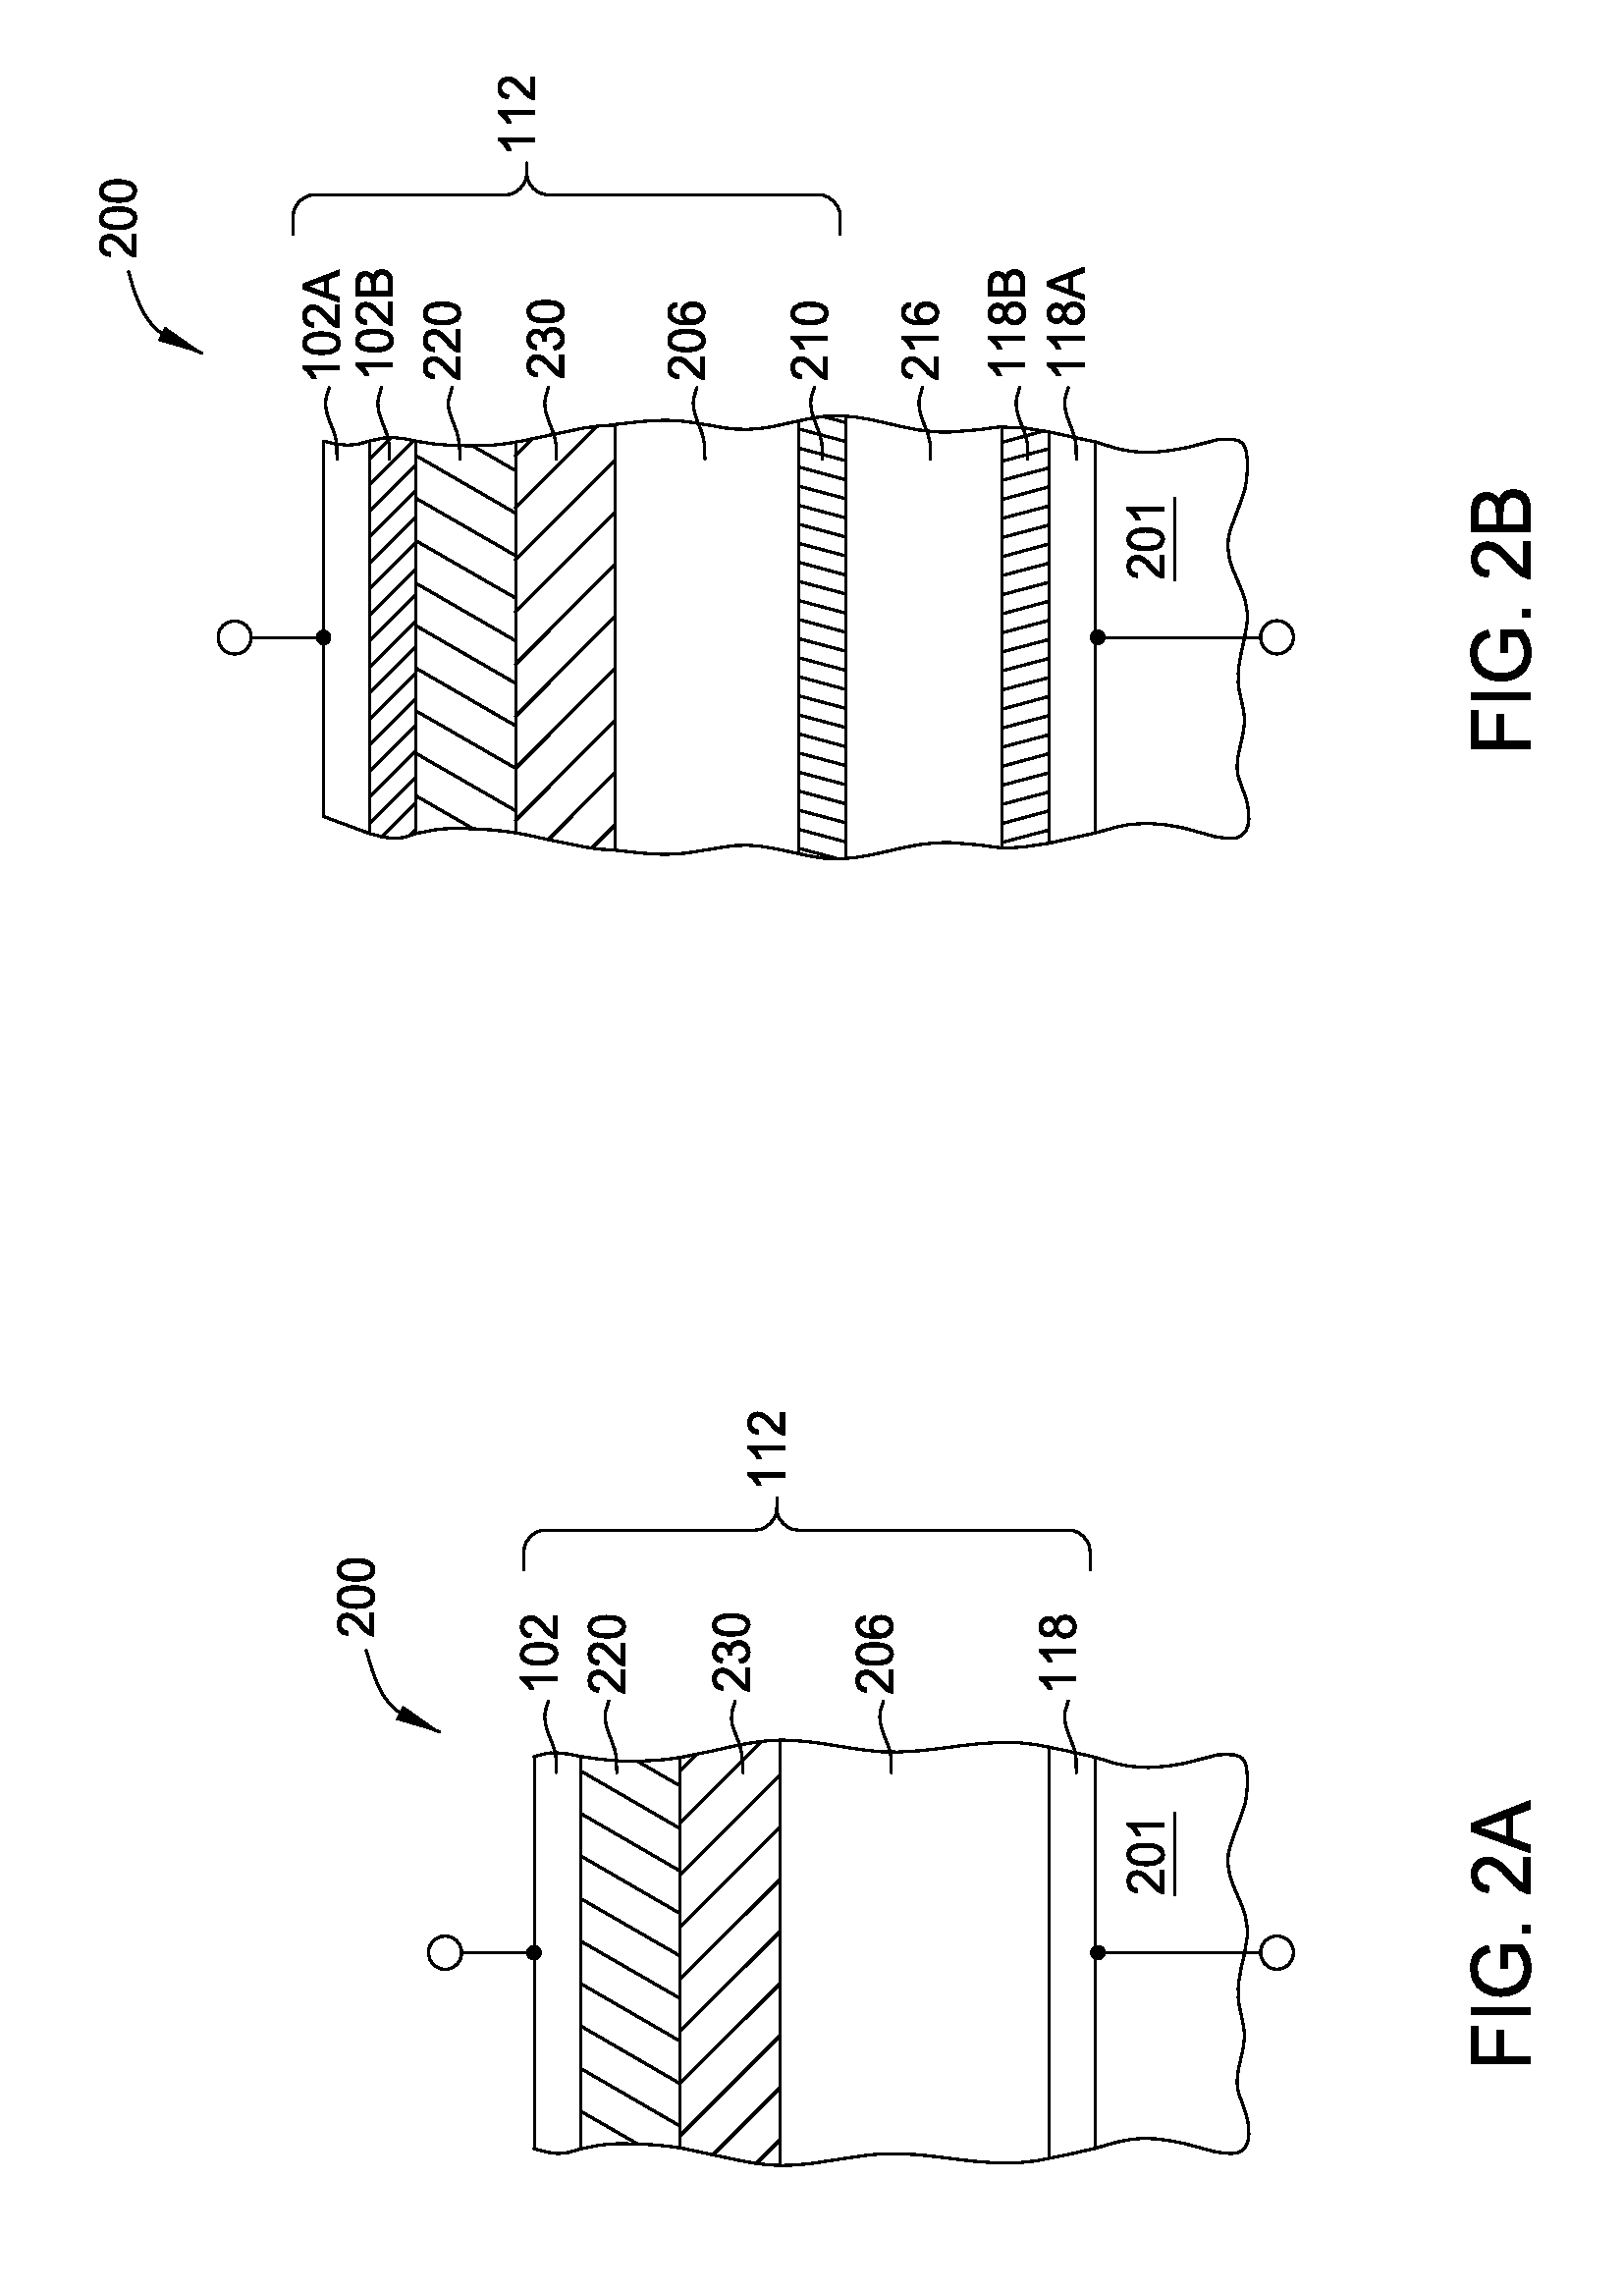 Current-limiting layer and a current-reducing layer in a memory device